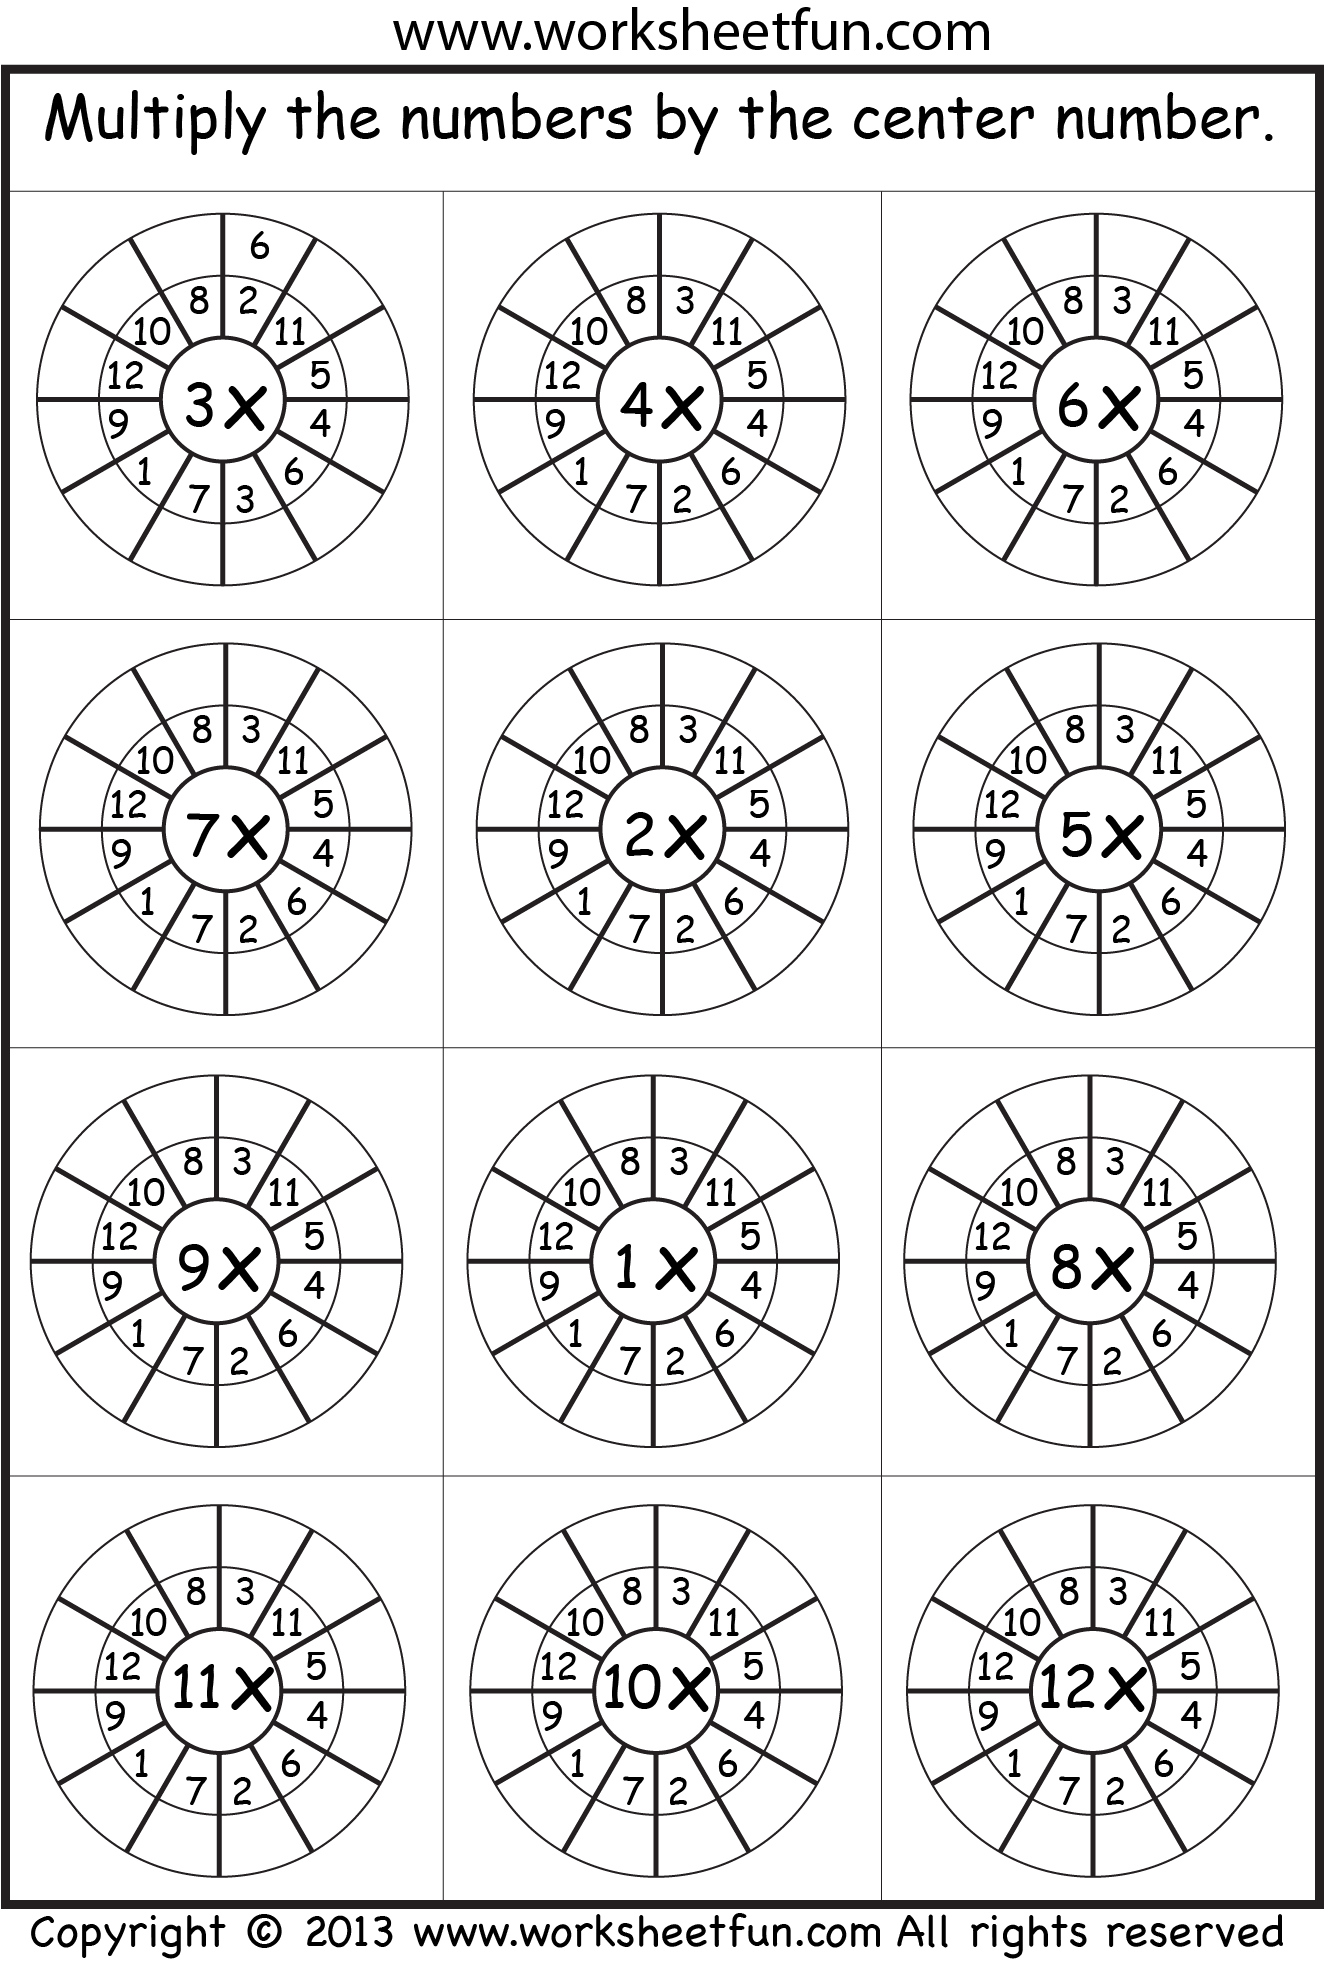 times-table-worksheets-1-2-3-4-5-6-7-8-9-10-11-12-13-14